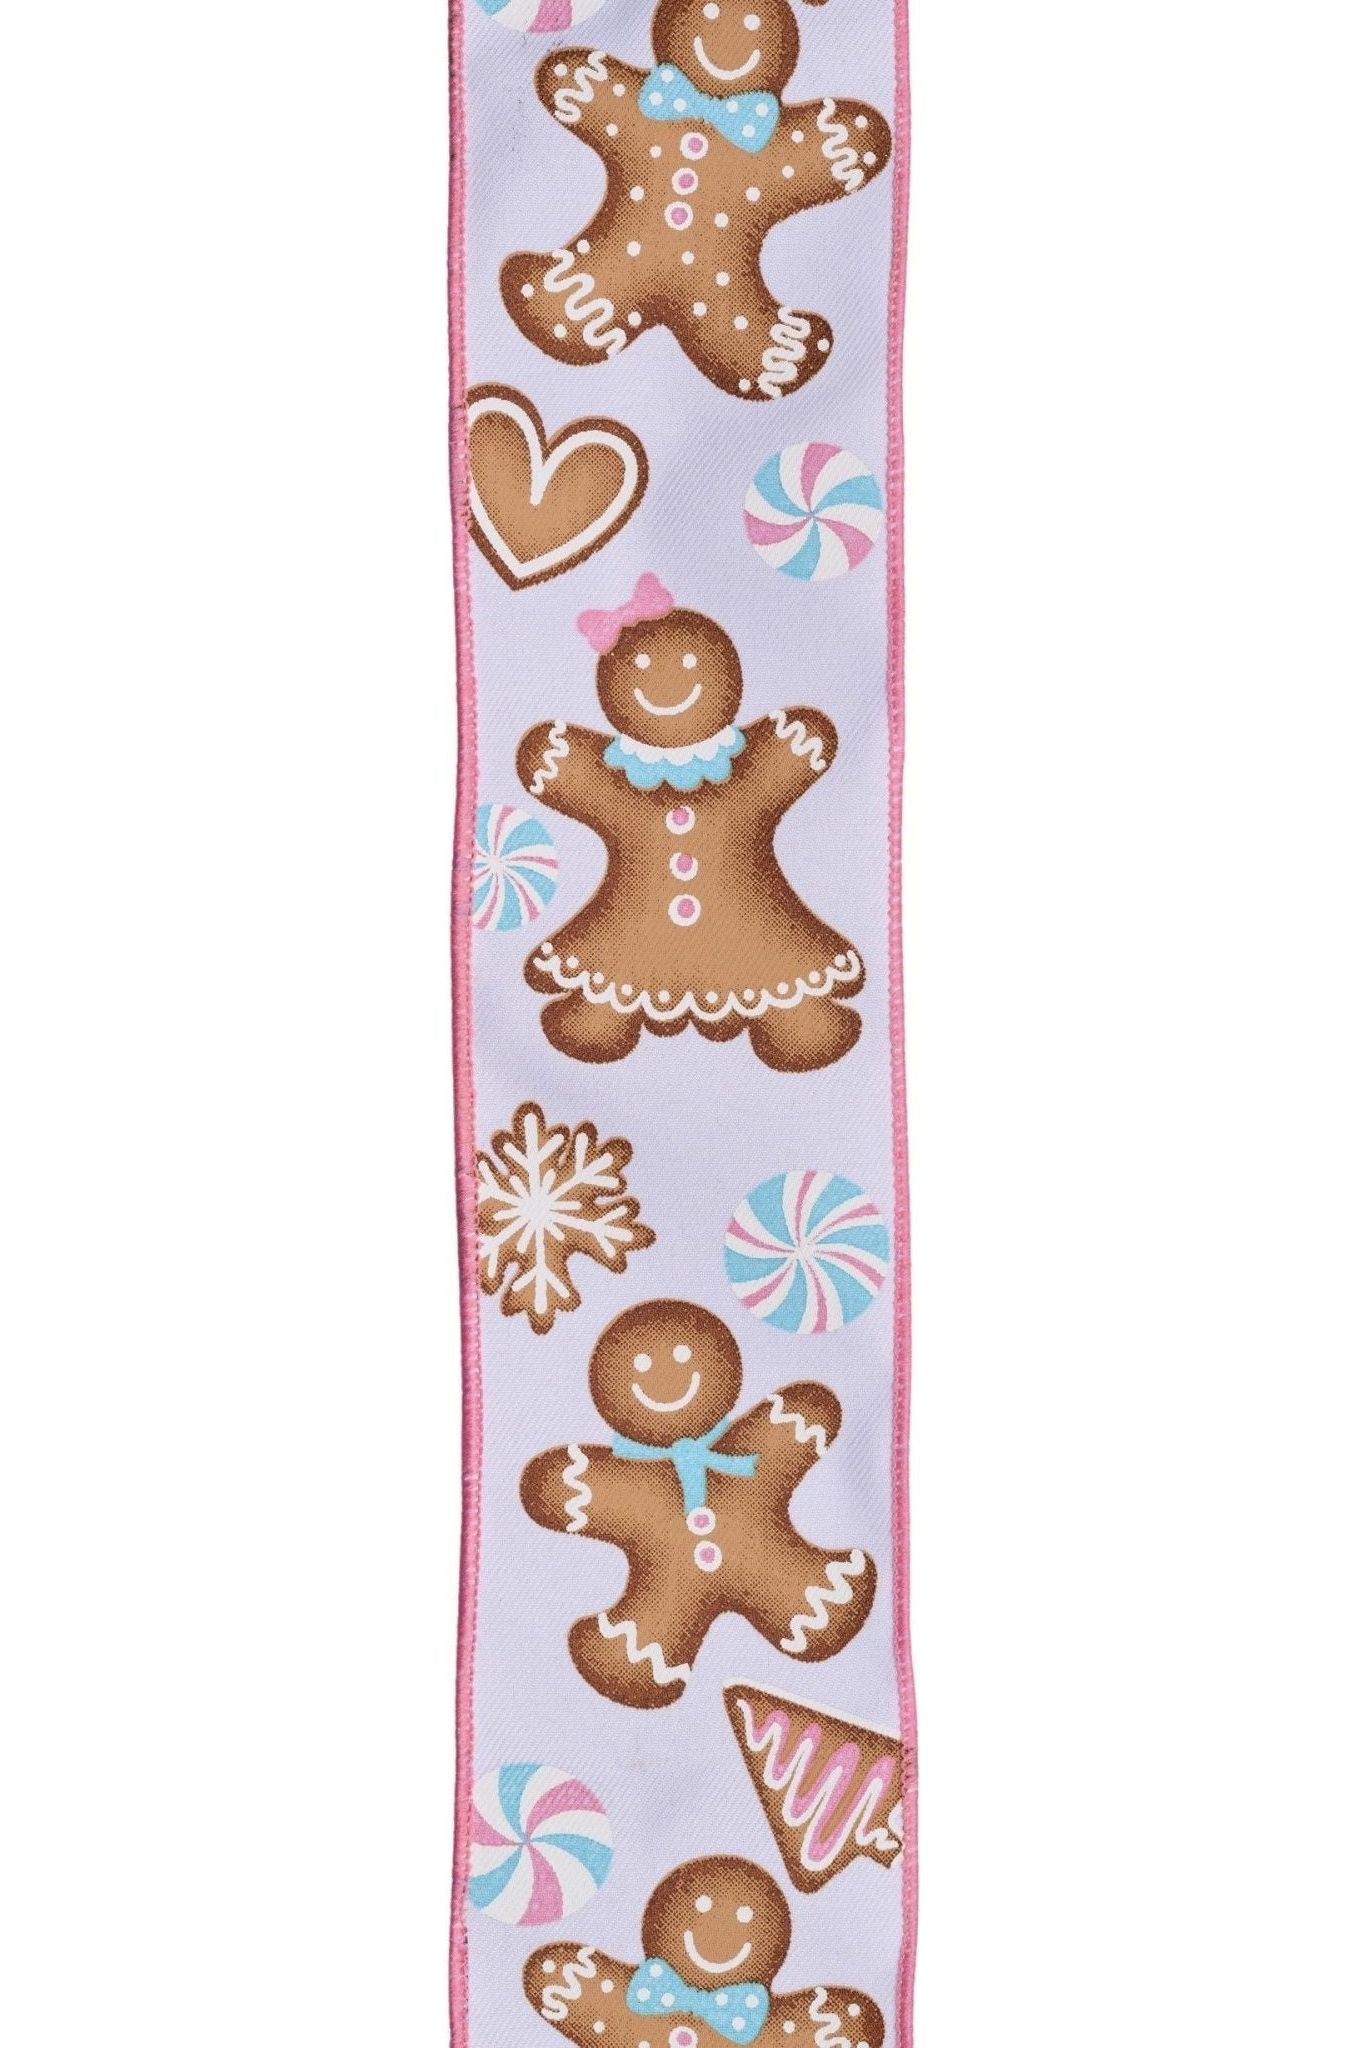 Shop For 2.5" Gingerbread Kids Ribbon: Pink/Blue (10 Yards) RGF143827